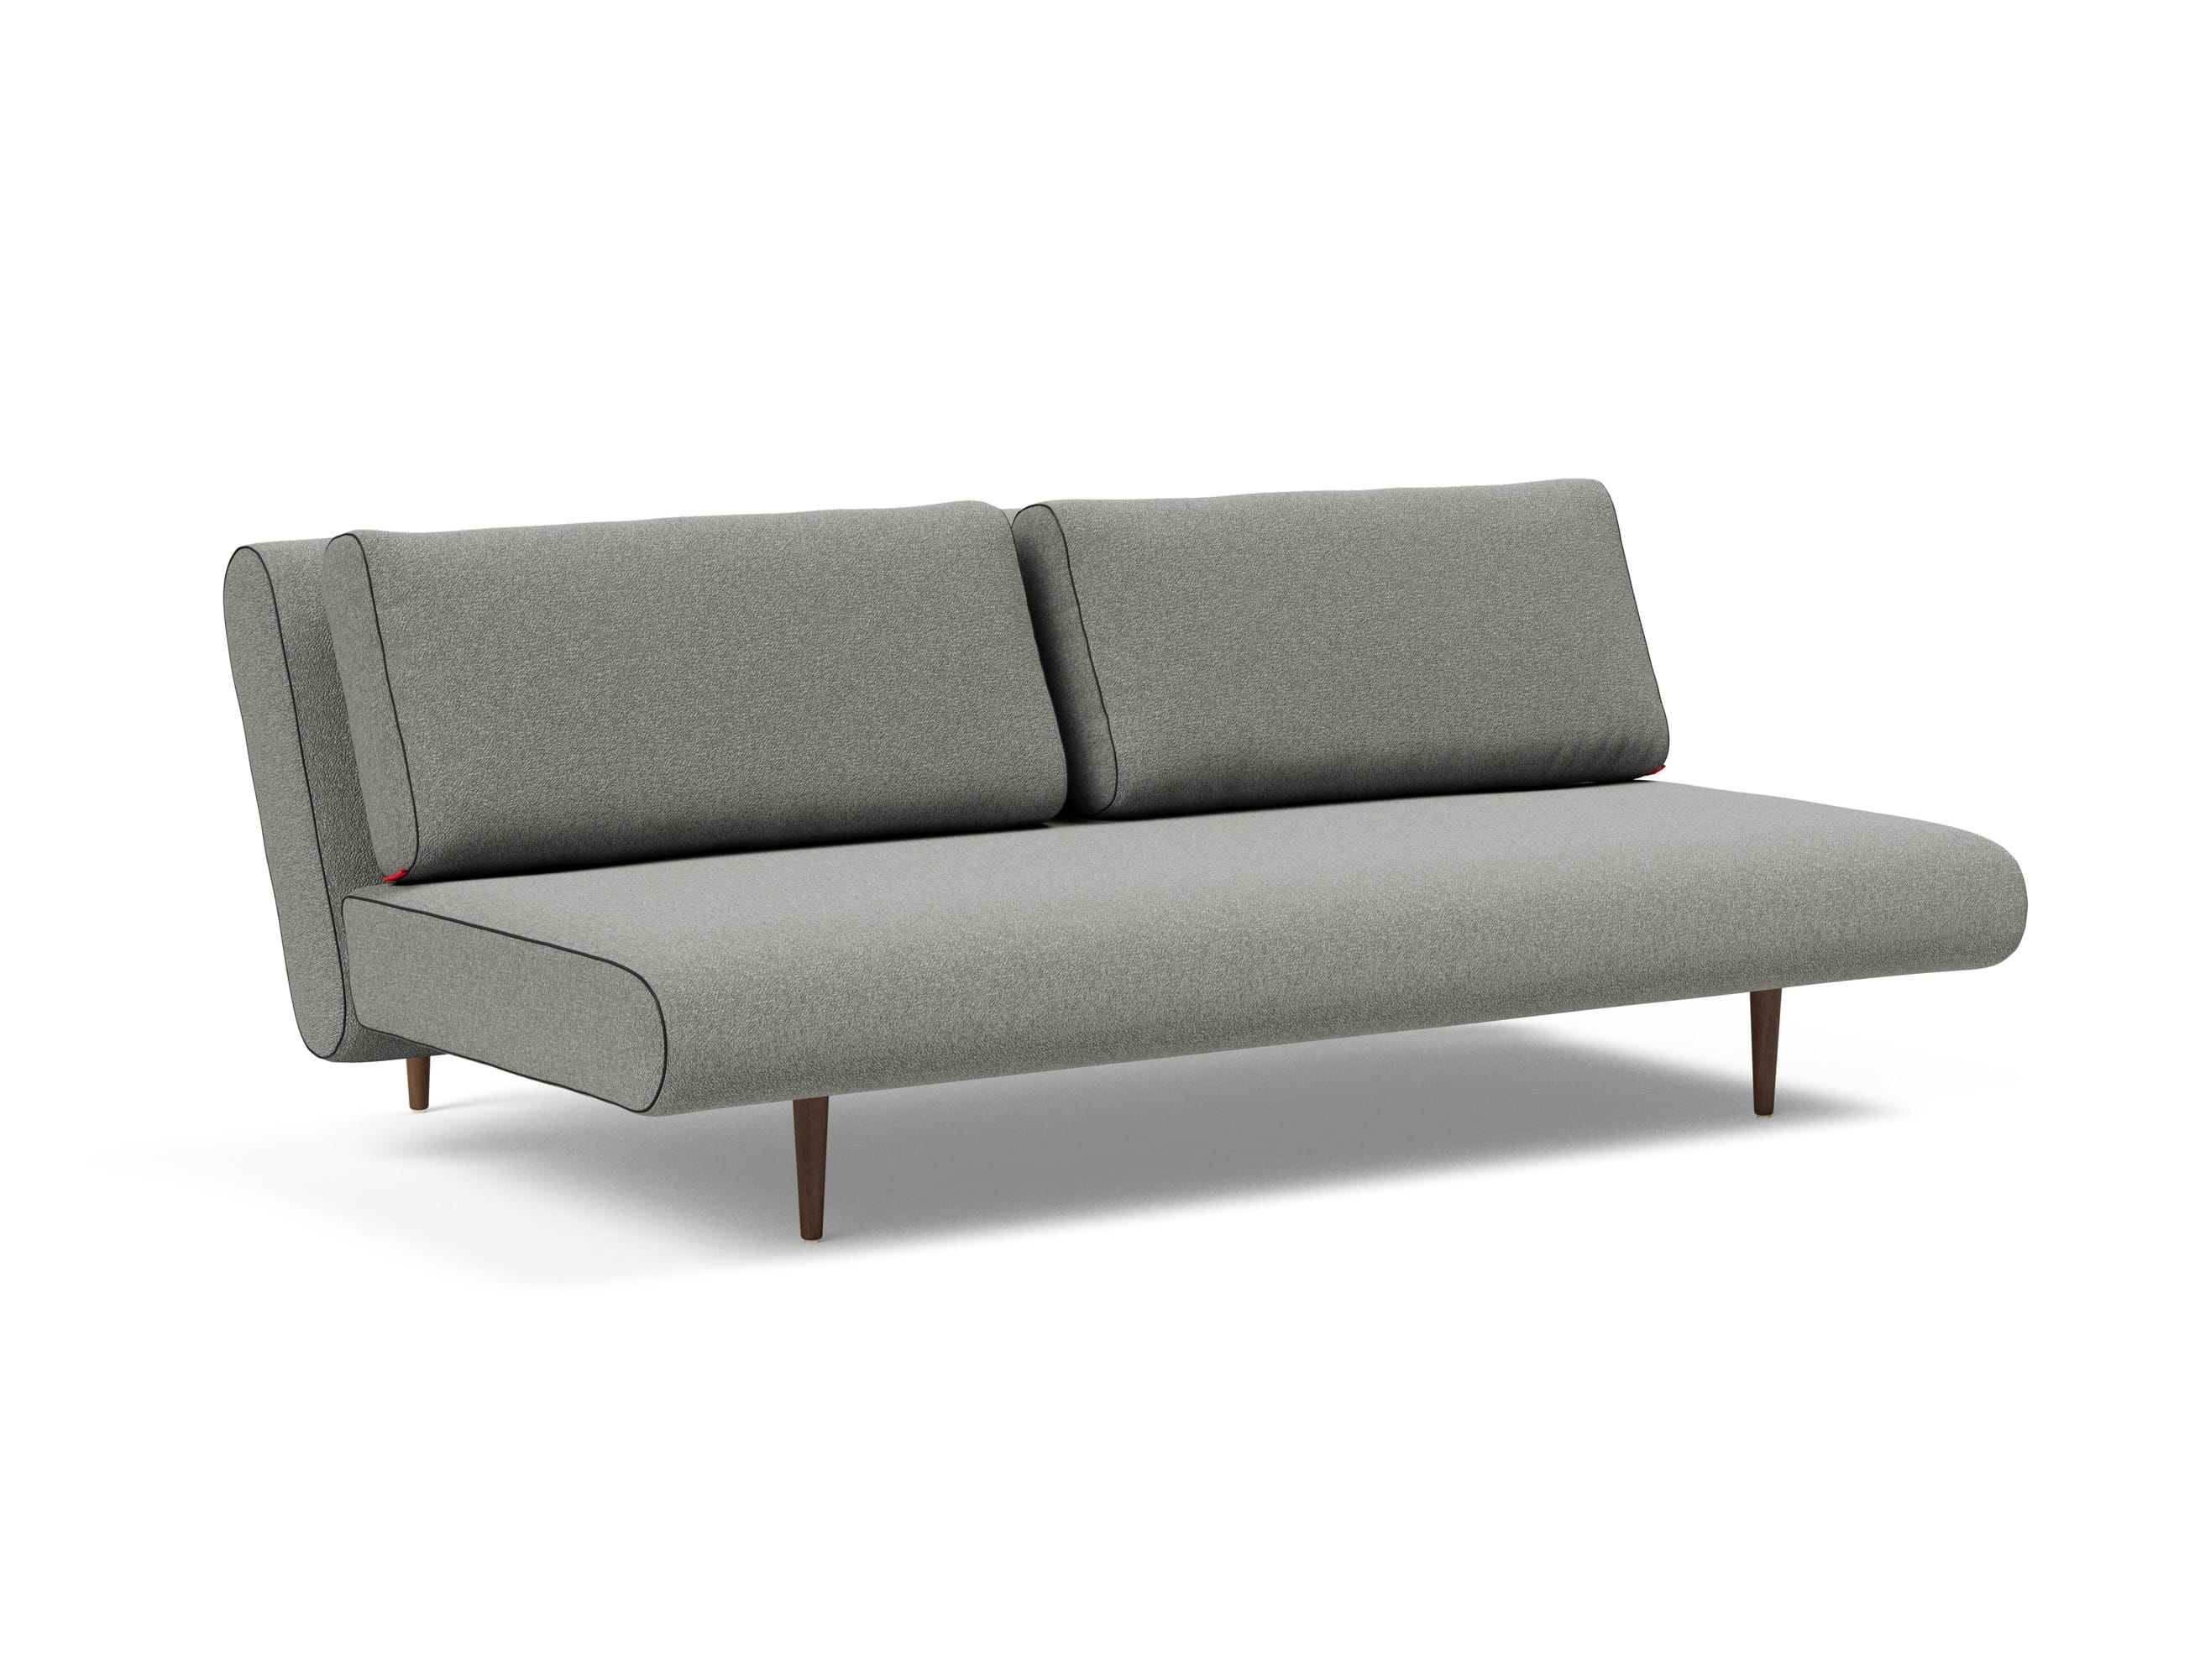 Unfurl Lounger Sofa Bed (Full Size) Boucle Ash Gray by Innovation